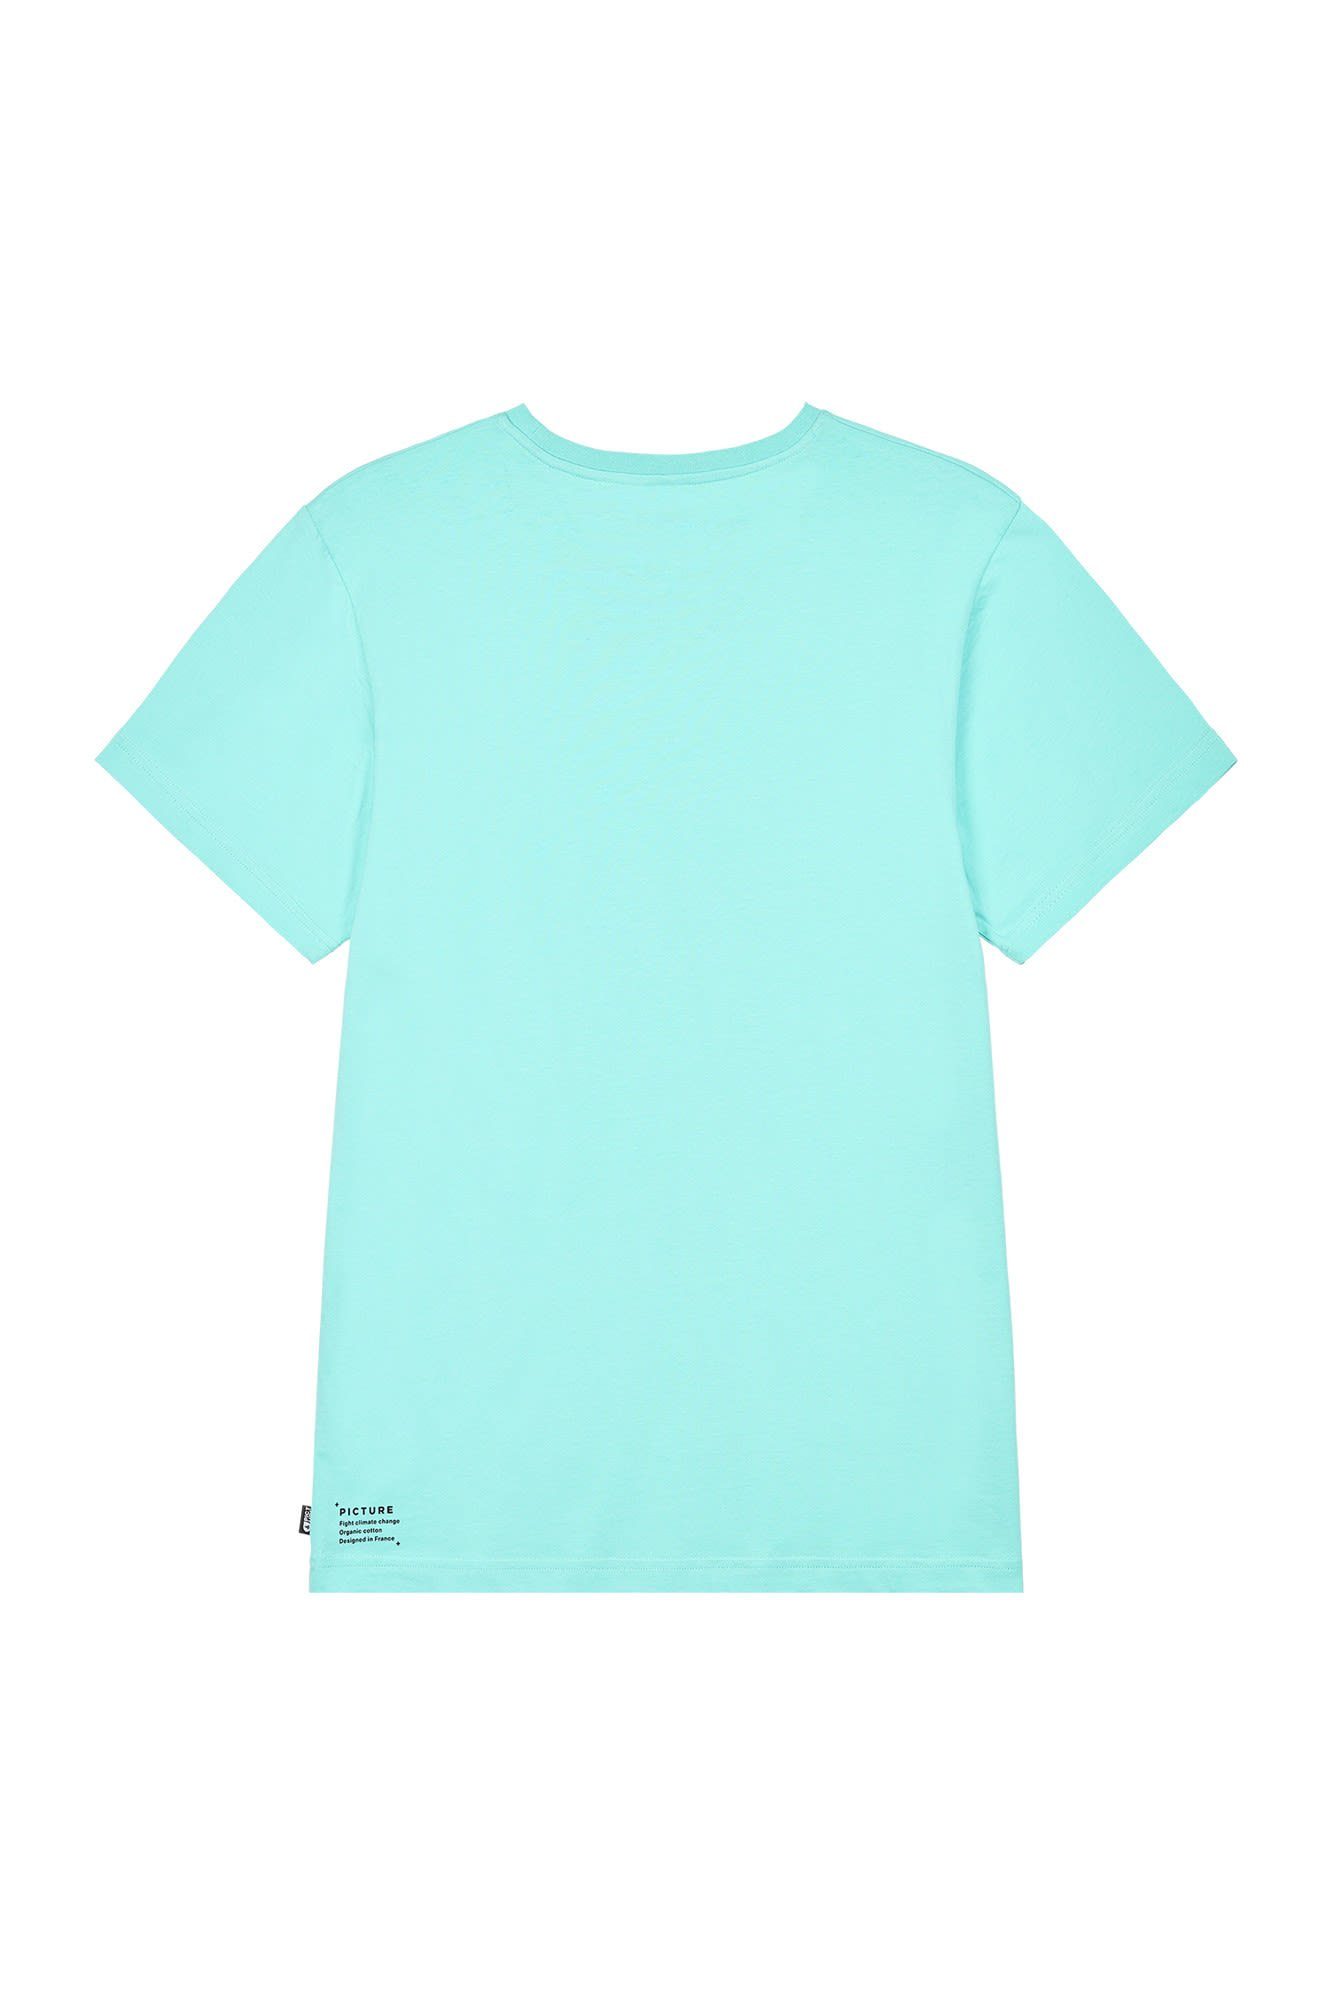 Picture M Picture Kurzarm-Shirt T-Shirt Turquoise Blue Herren Tee Murray